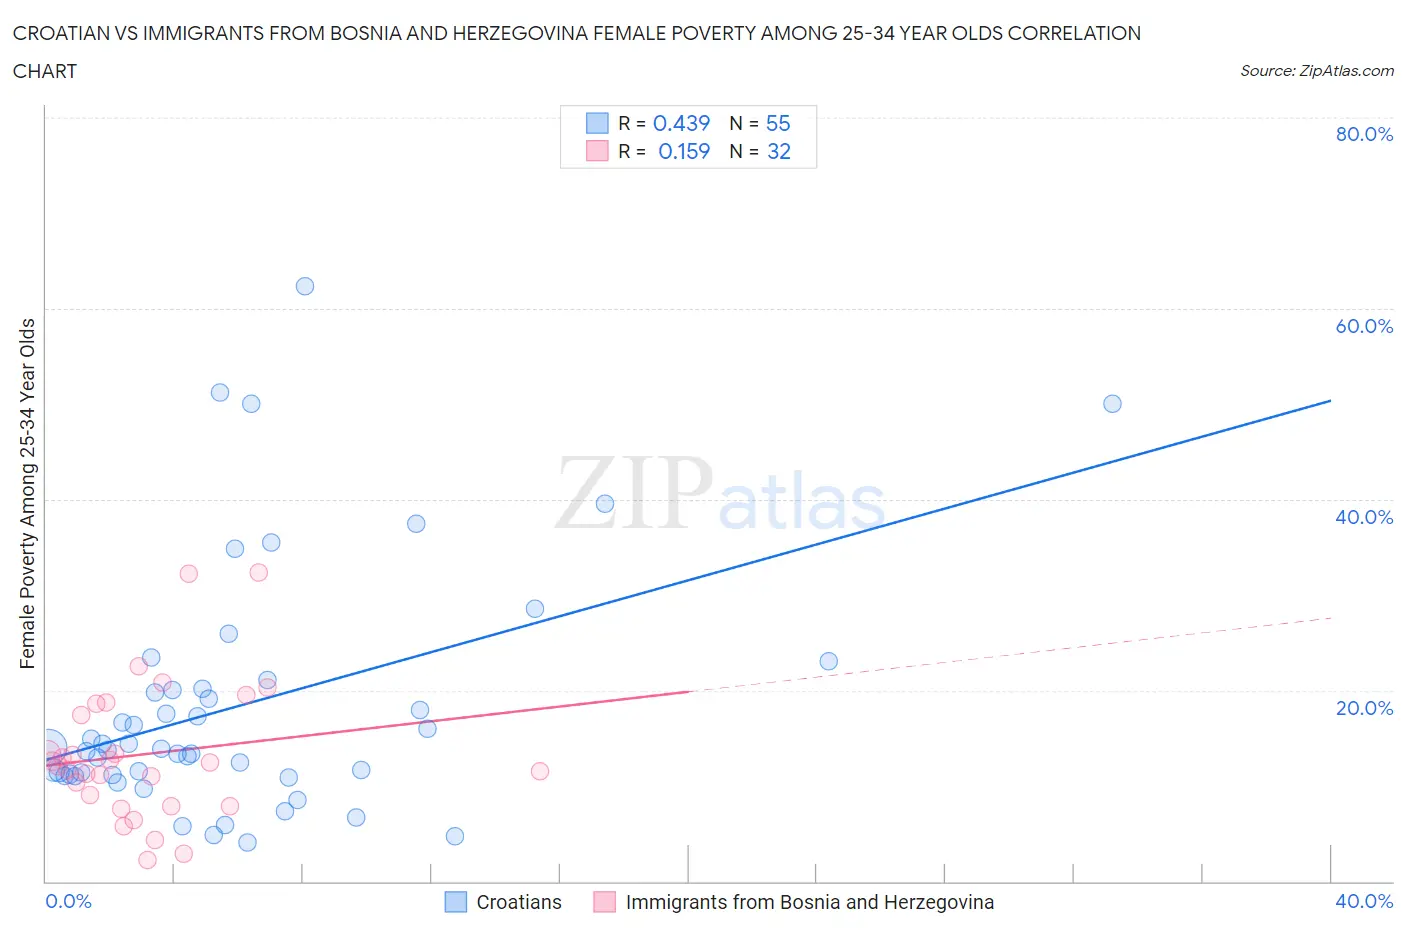 Croatian vs Immigrants from Bosnia and Herzegovina Female Poverty Among 25-34 Year Olds